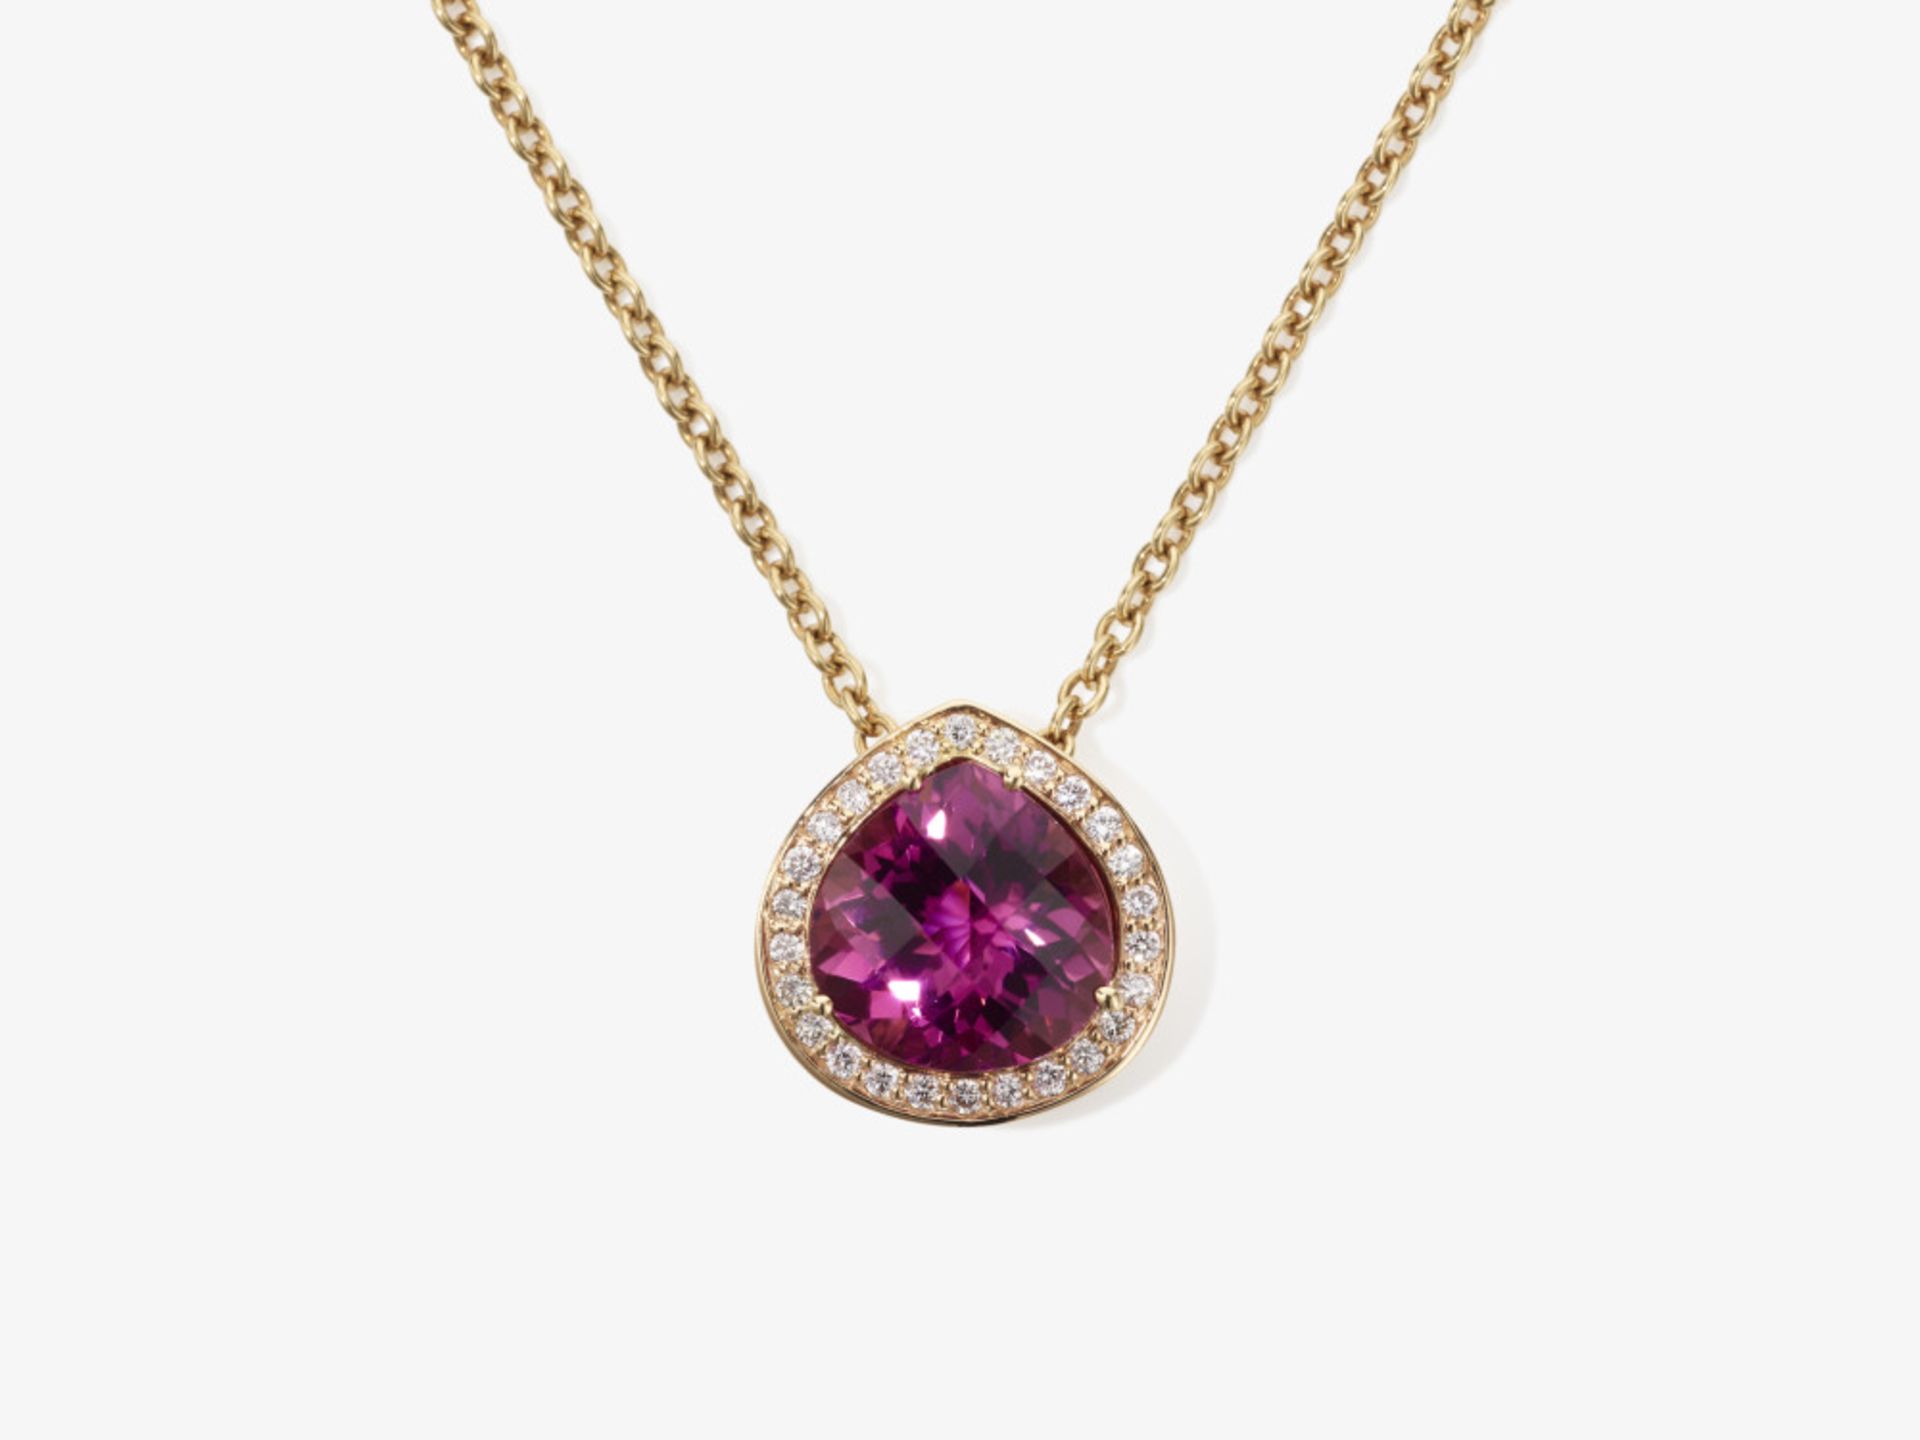 A classic pendant necklace decorated with a pink-red rubellite and brilliant-cut diamonds - Germany